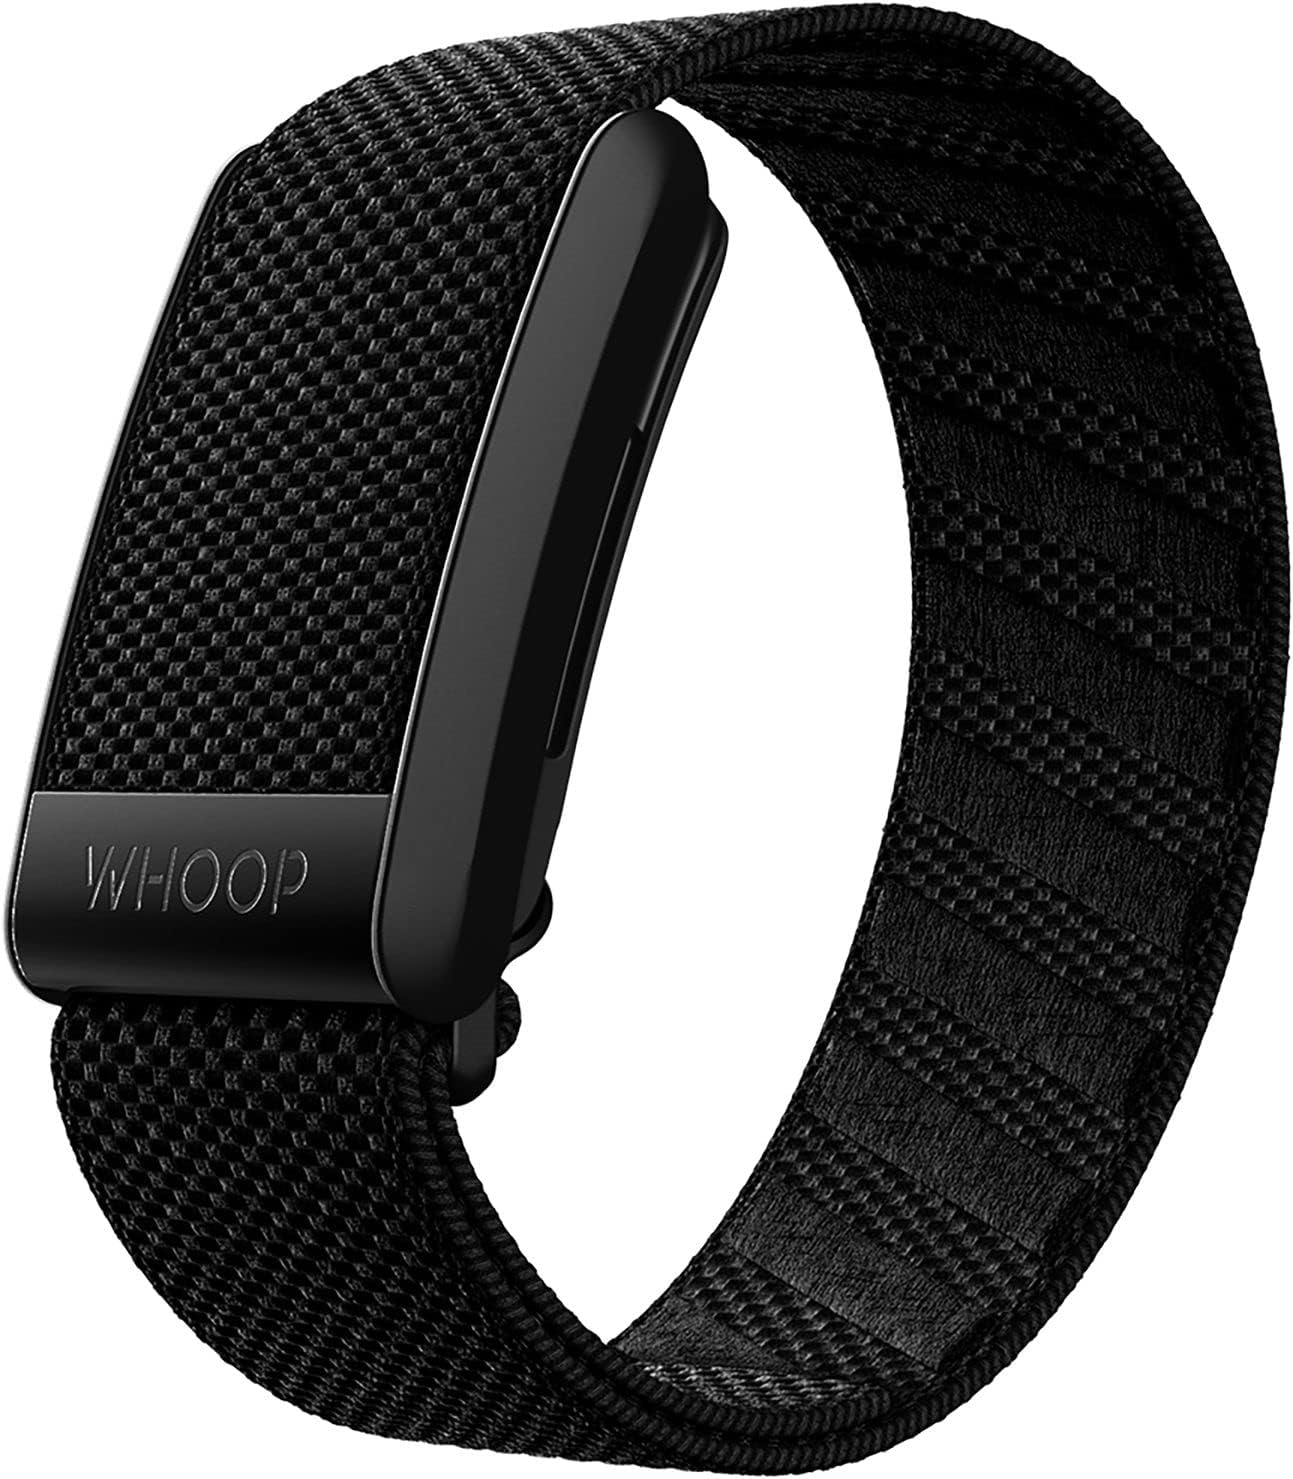 WHOOP 4.0: The Essential Fitness Band